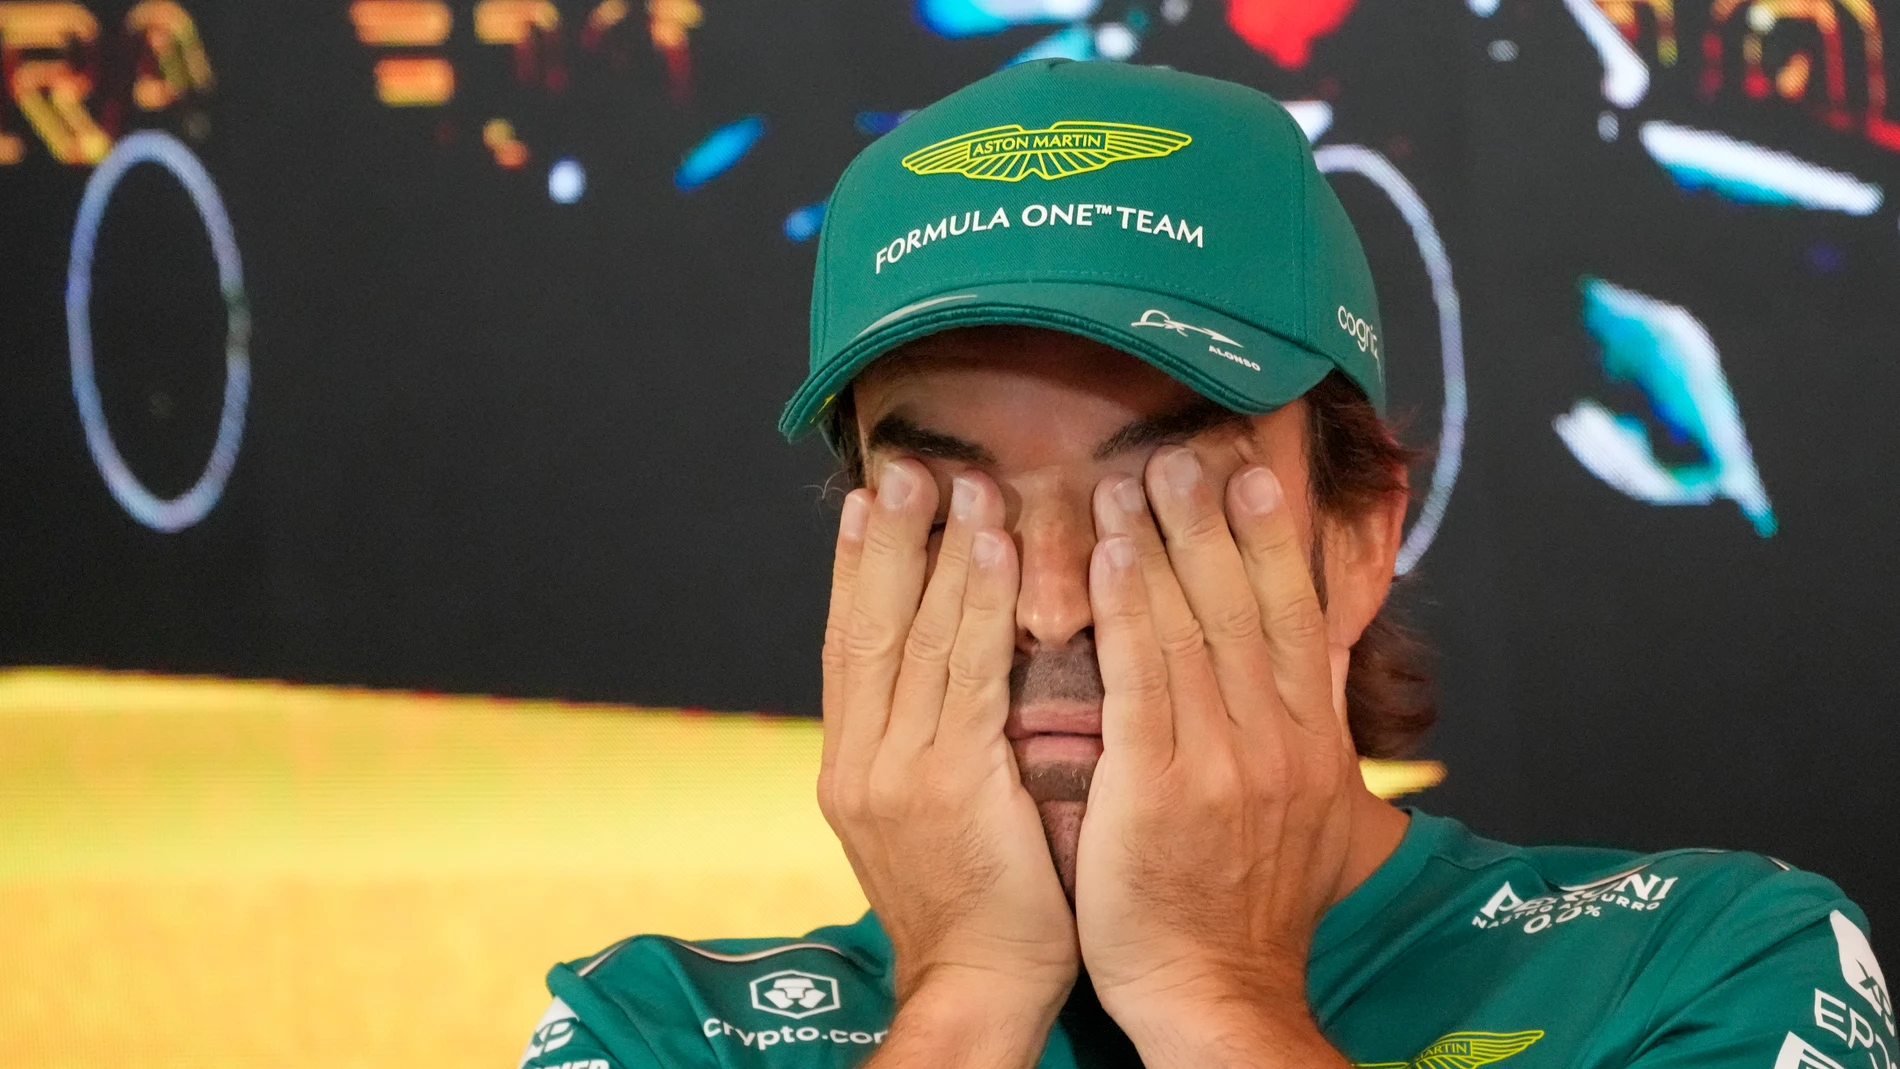 Spanish Formula One driver Fernando Alonso of Aston Martin touches his eyes during a news conference ahead of the Austrian F1 Grand Prix at the Red Bull Ring racetrack in Spielberg, Austria, Thursday, June 29, 2023. The Austrian F1 Grand Prix is held on Sunday, July 2, 2023. (AP Photo/Darko Vojinovic)